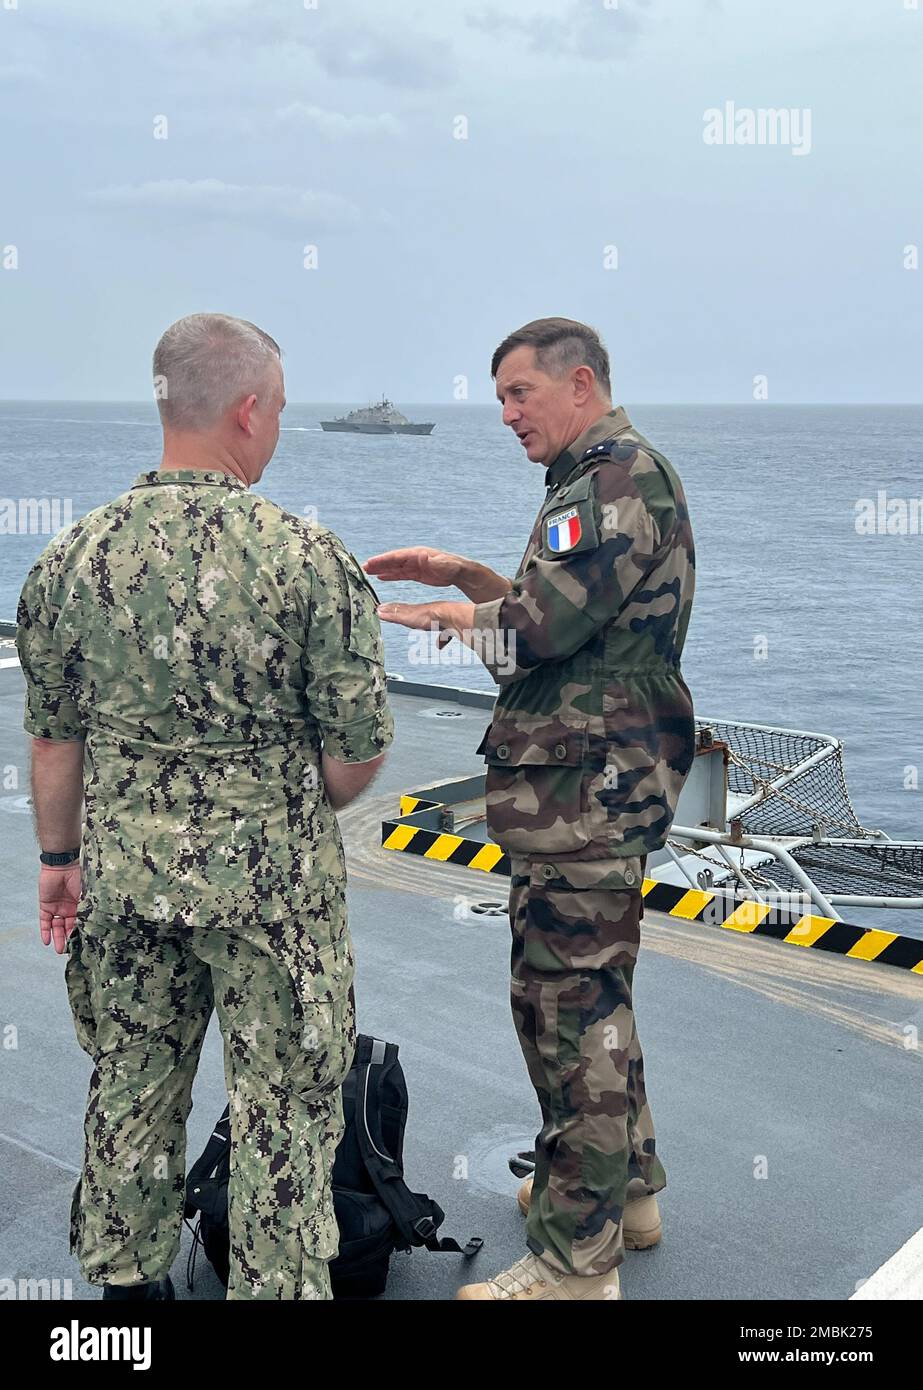 220616-N-TW039-0103  GUADELOUPE, France - (June 16, 2022) – U.S. Navy Rear Adm. Doug Sasse, Reserve Vice Commander of U.S. Naval Forces Southern Command/U.S. 4th Fleet and French navy Rear Adm. Eric Aymard, Commander-in-Chief of French forces in the Caribbean, observe operations on the French amphibious assault ship Mistral (L9013) as part of a distinguished visitor’s (DV) day demonstration during exercise Caraibes 2022, June 16, 2022. Caraibes 2022 is a French led, combined and joint training exercise in the Caribbean involving naval, air and land assets. This multi-national exercise aims to Stock Photo